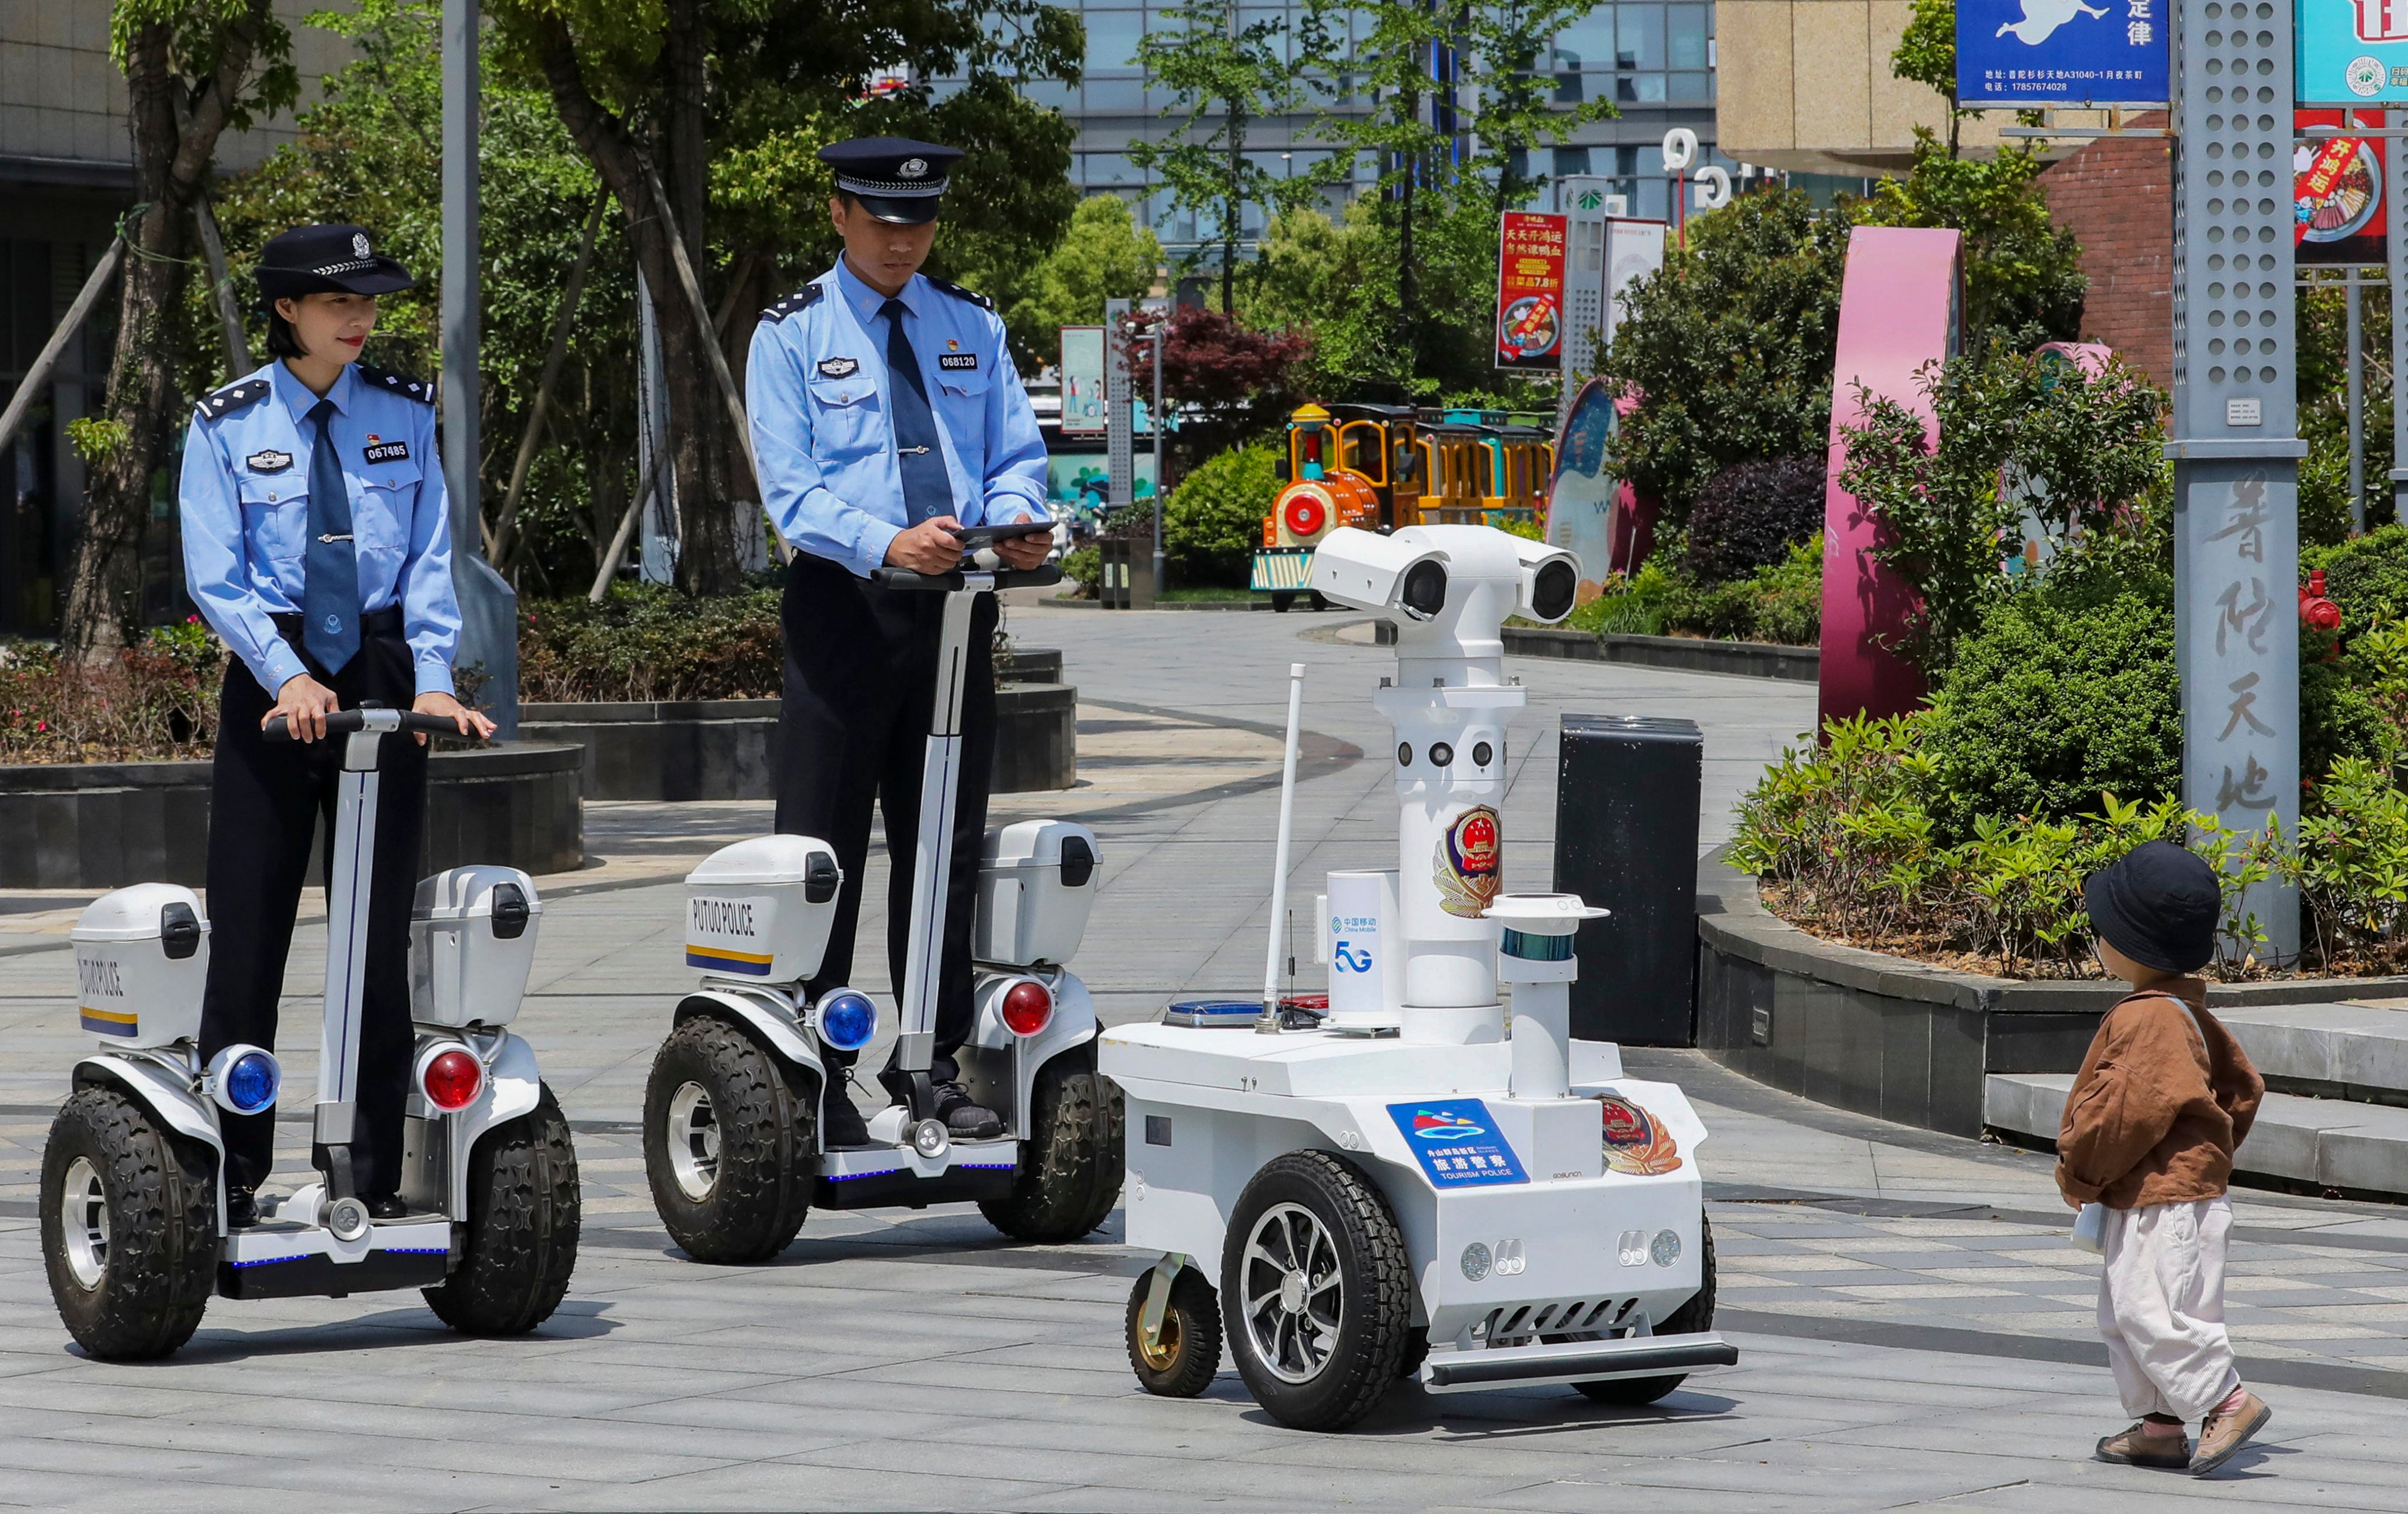 The Chinese government is assessing the need for AI-powered robots to boost the capacity of its police force. New research in China says patrolling robots should be a key part of police reform. Photo: Costfoto/Future Publishing via Getty Images